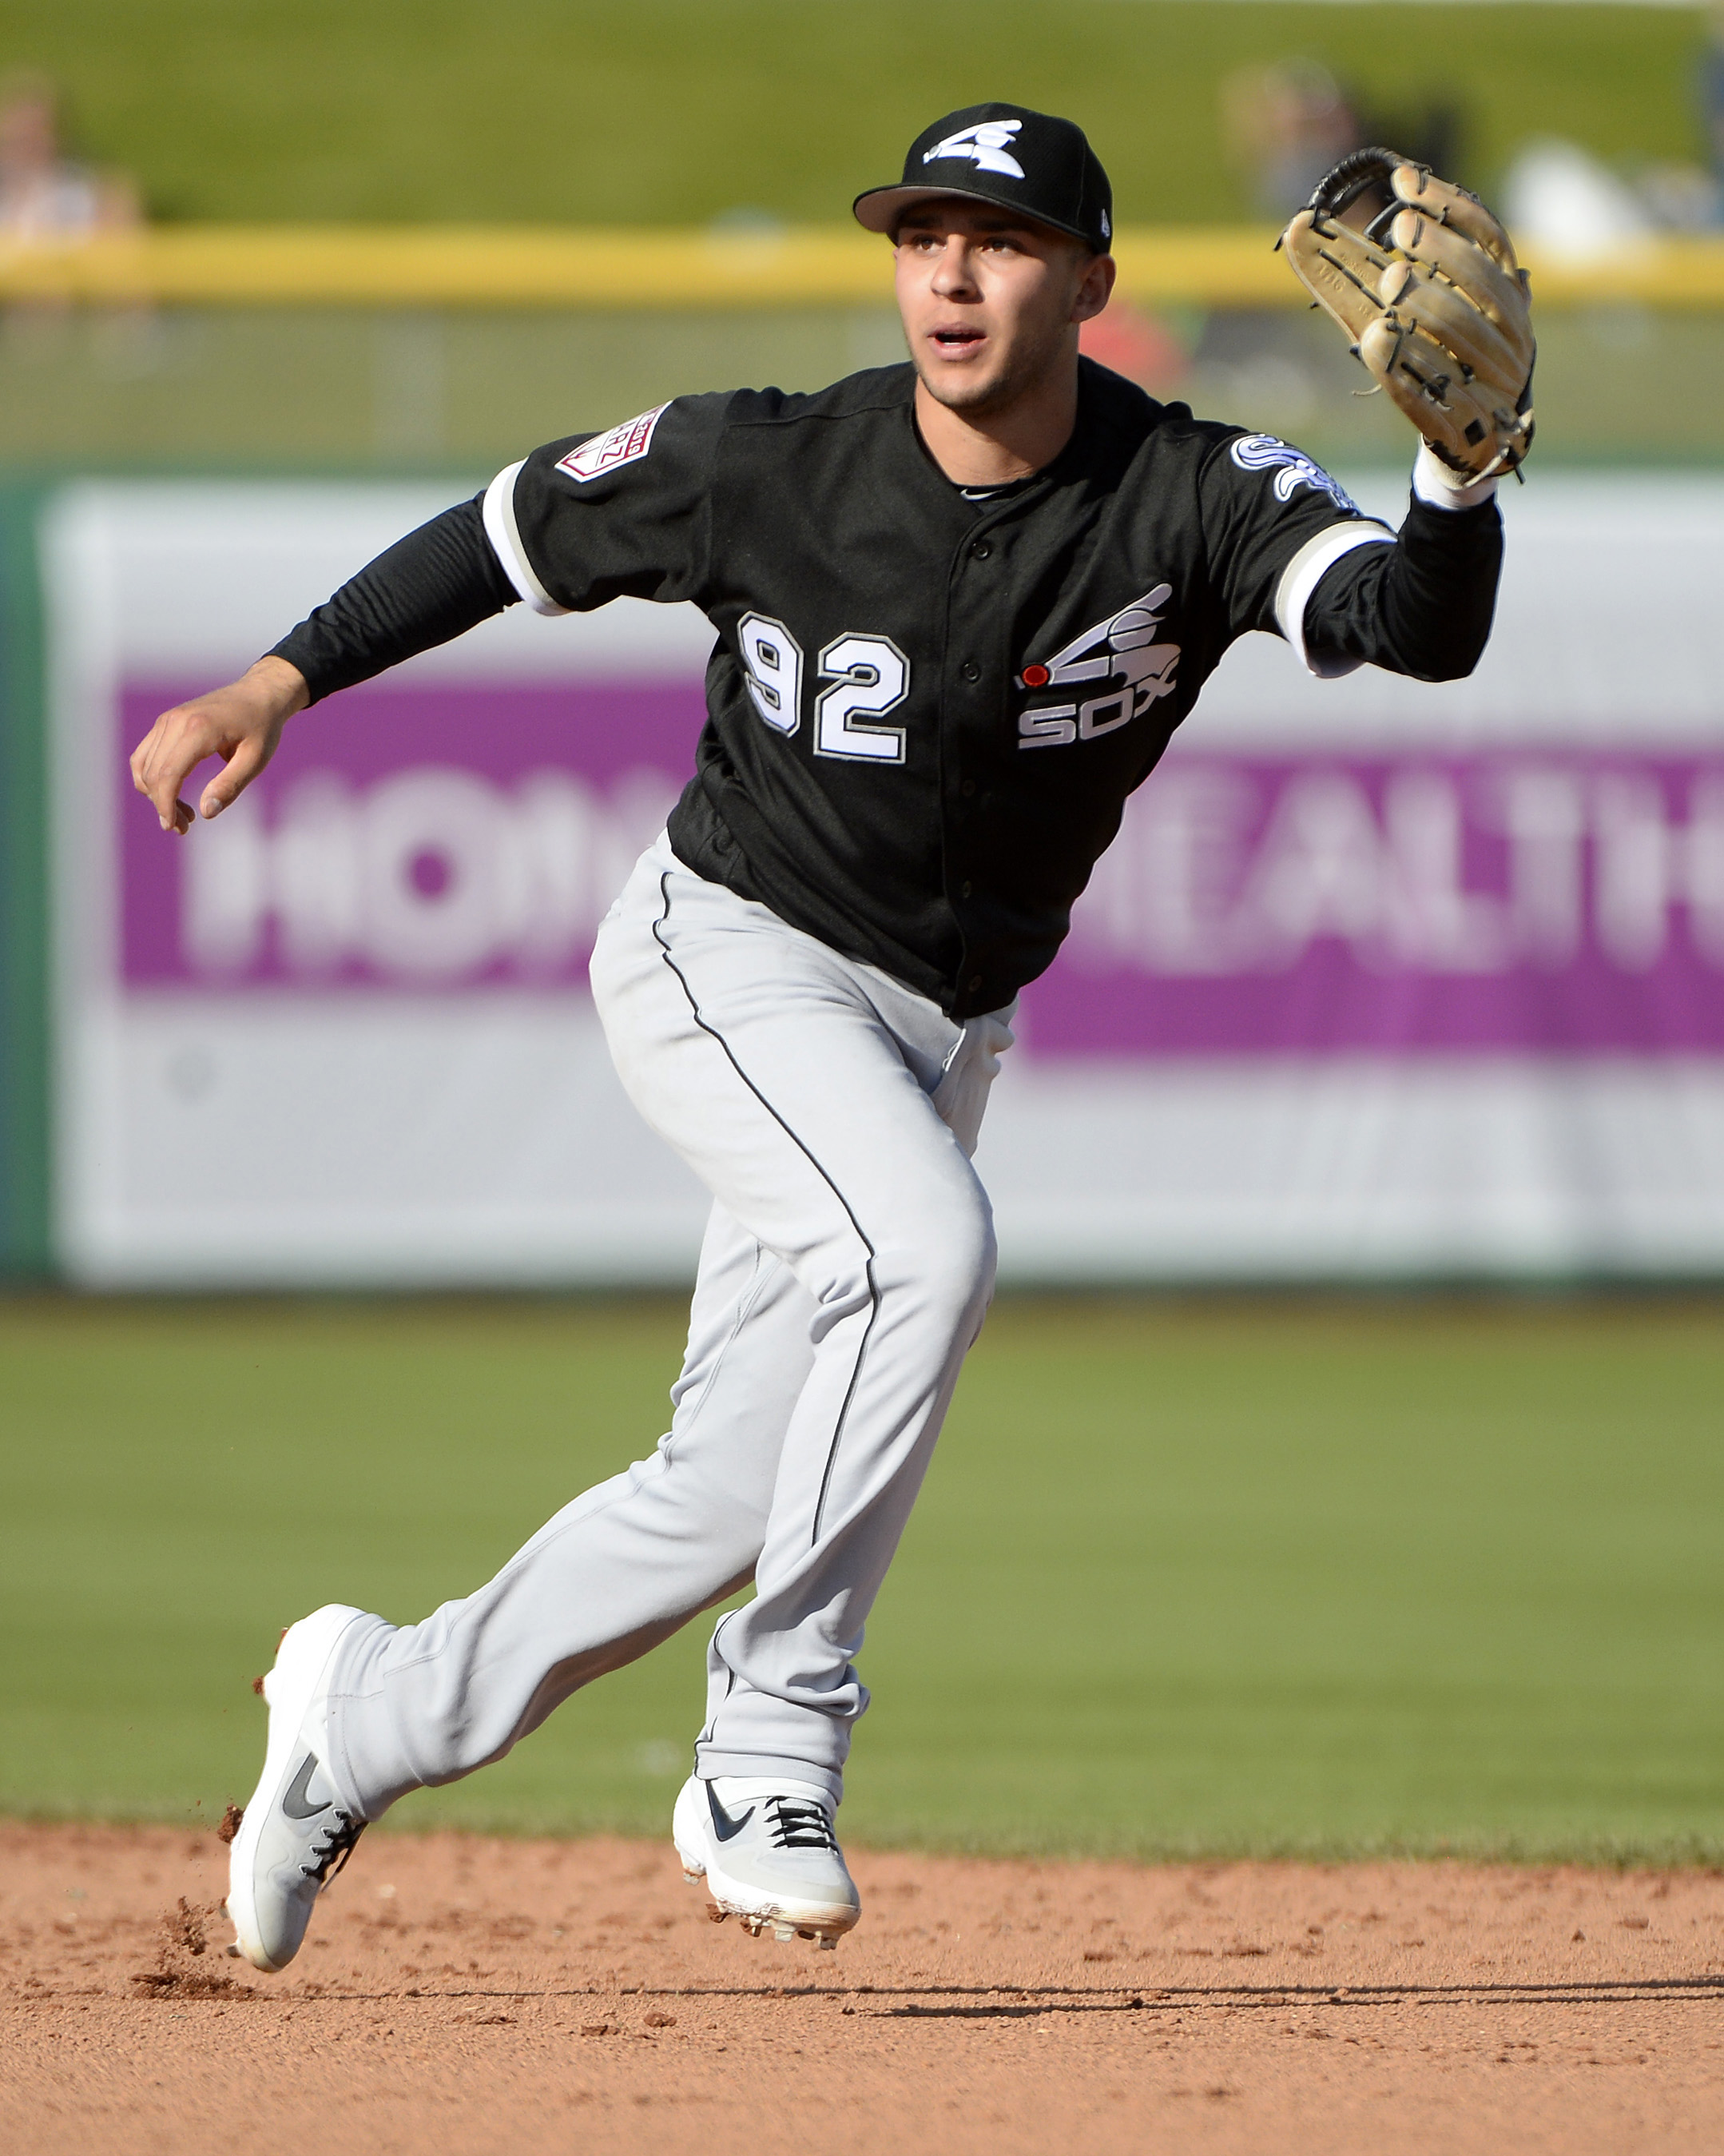 Ron Vesely/2020 Chicago White Sox Nick Madrigal